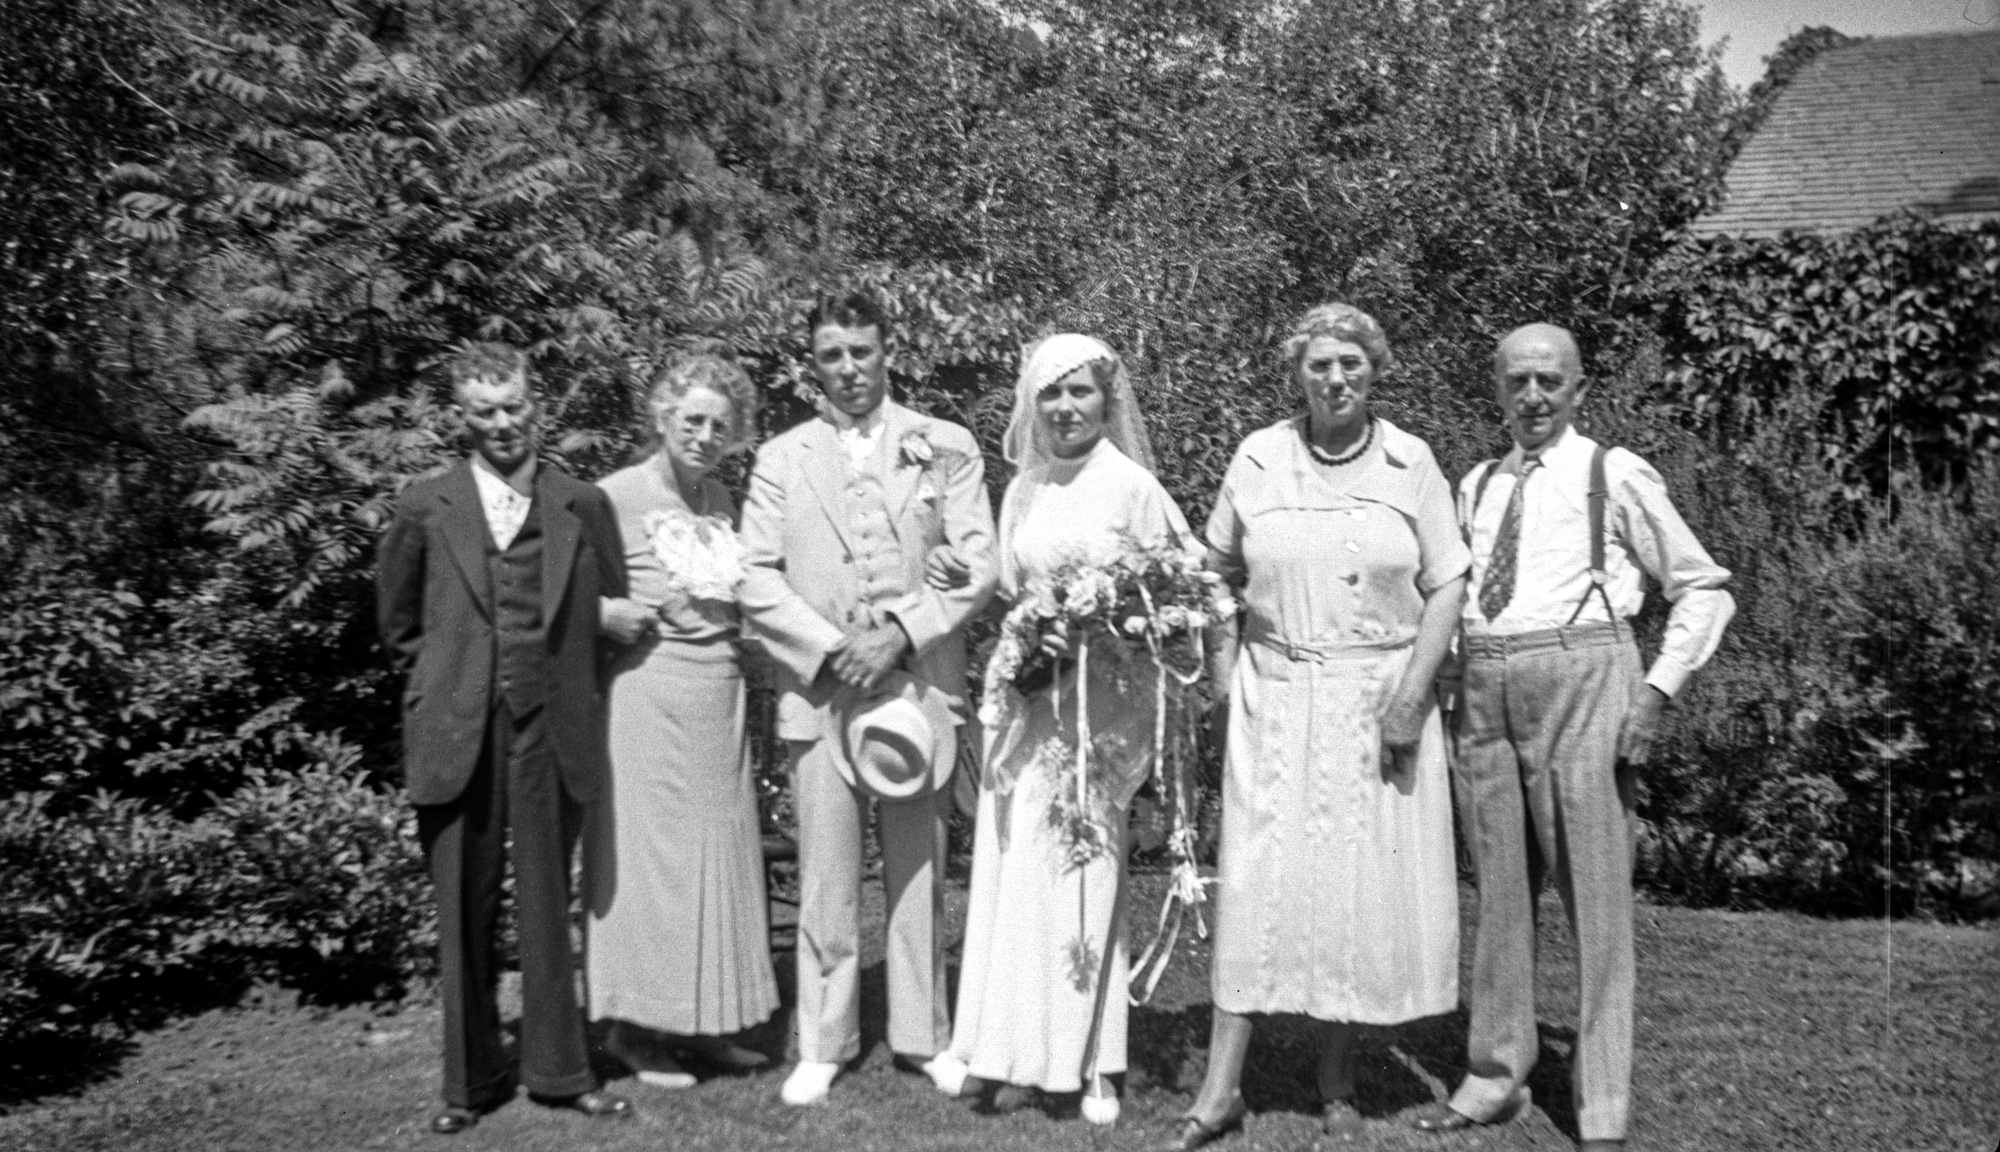 Dauth Family Archive - Wedding of Leslie Dauth to Ann Jeremiassen